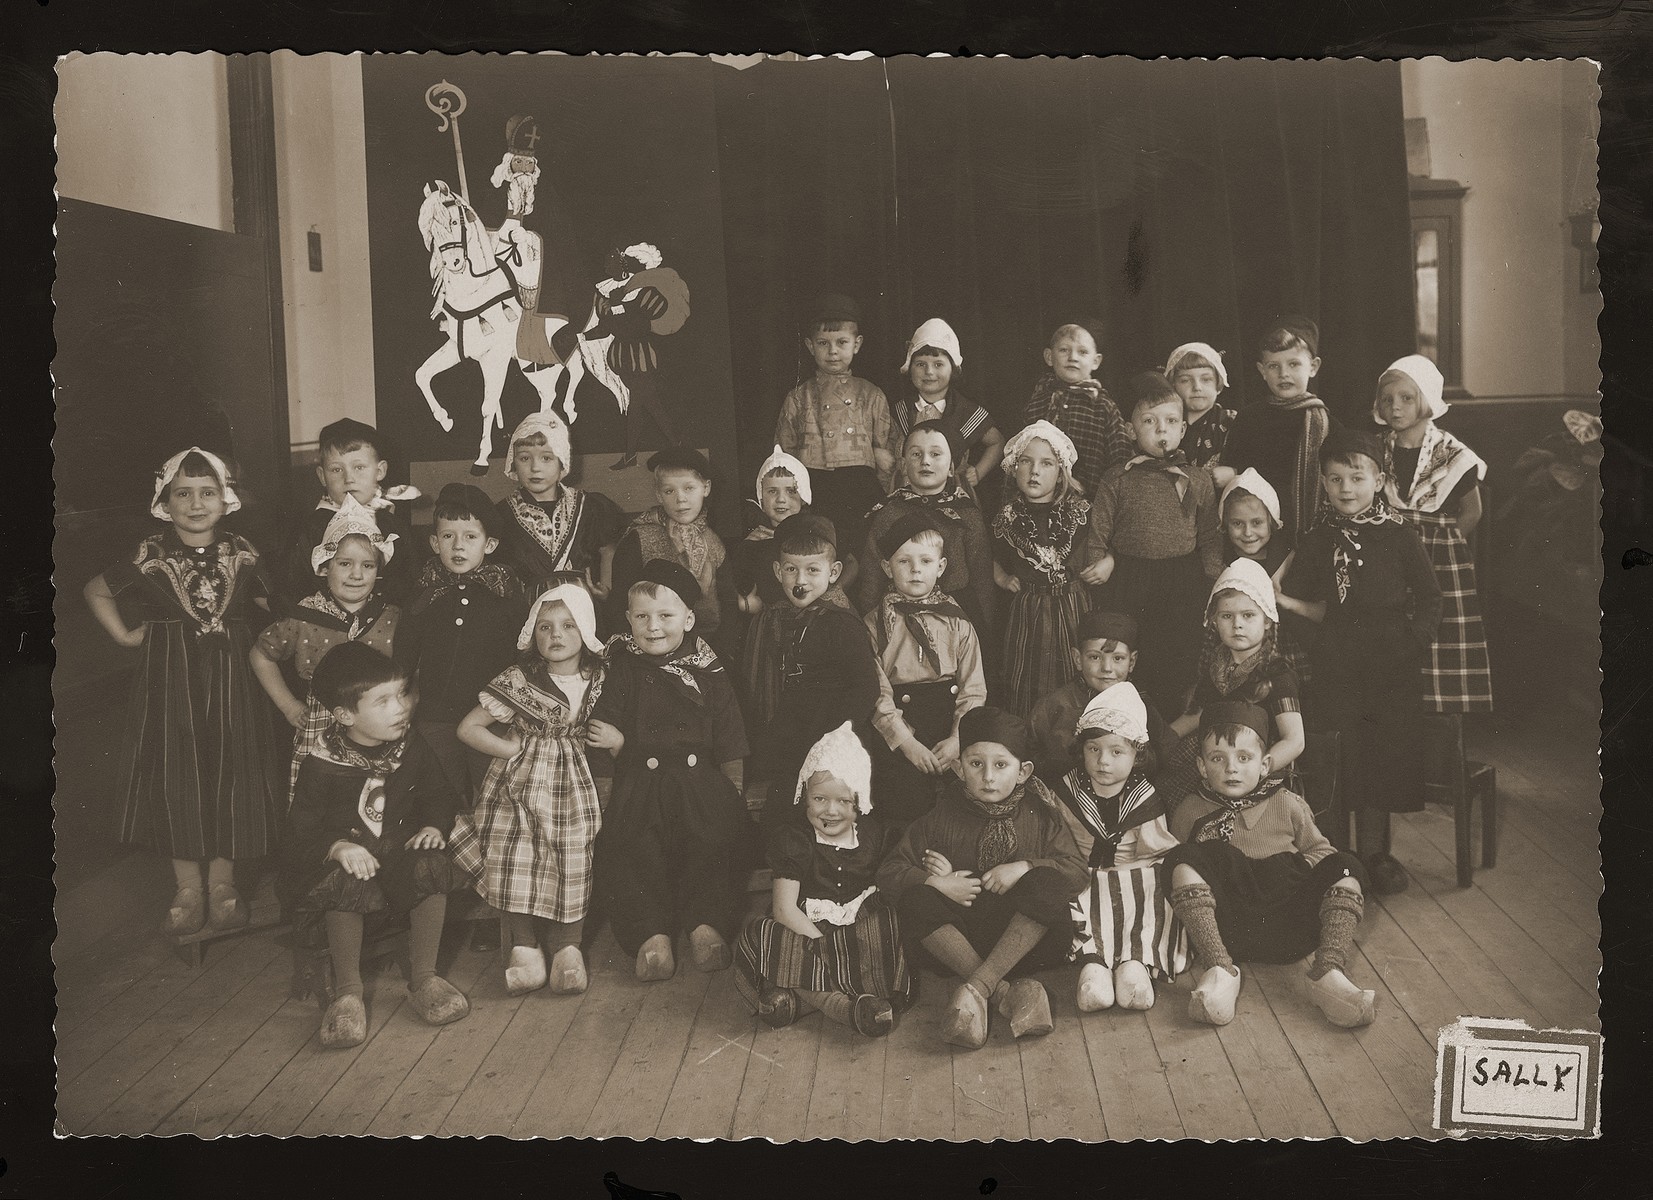 Dutch children pose in traditional costume for a school photo.  Included in the photo are a few Jewish children in hiding.